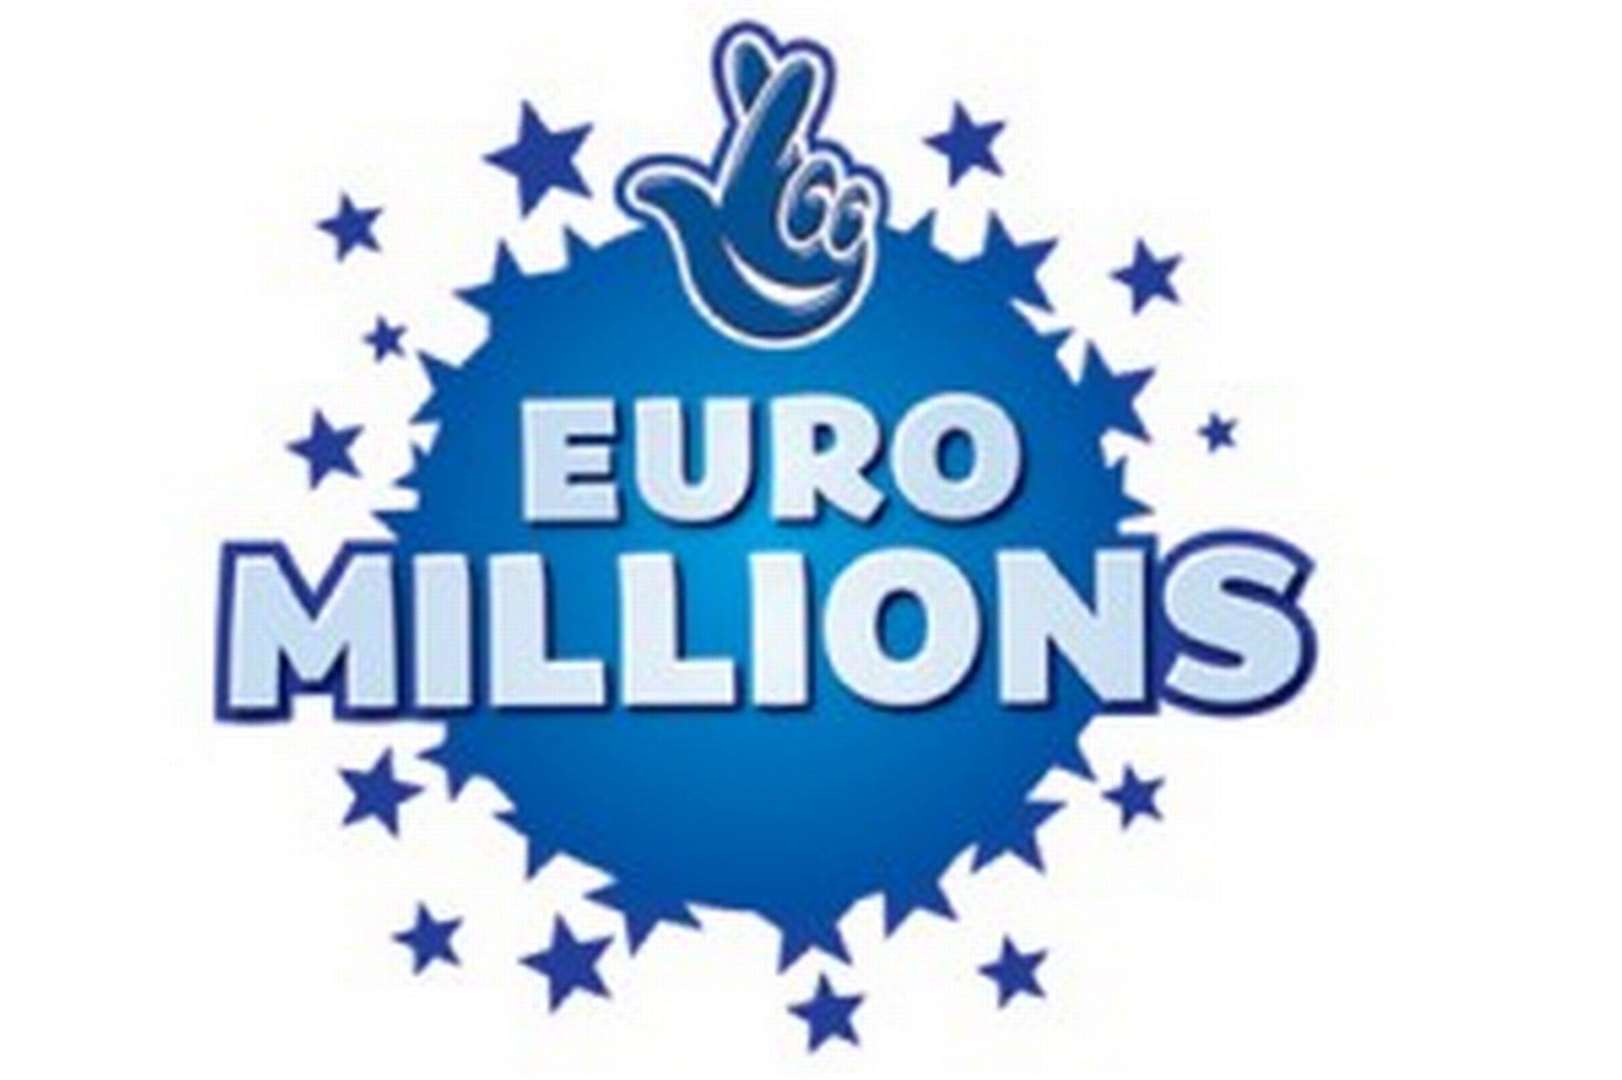 Mr F. was a big winner after playing EuroMillions.